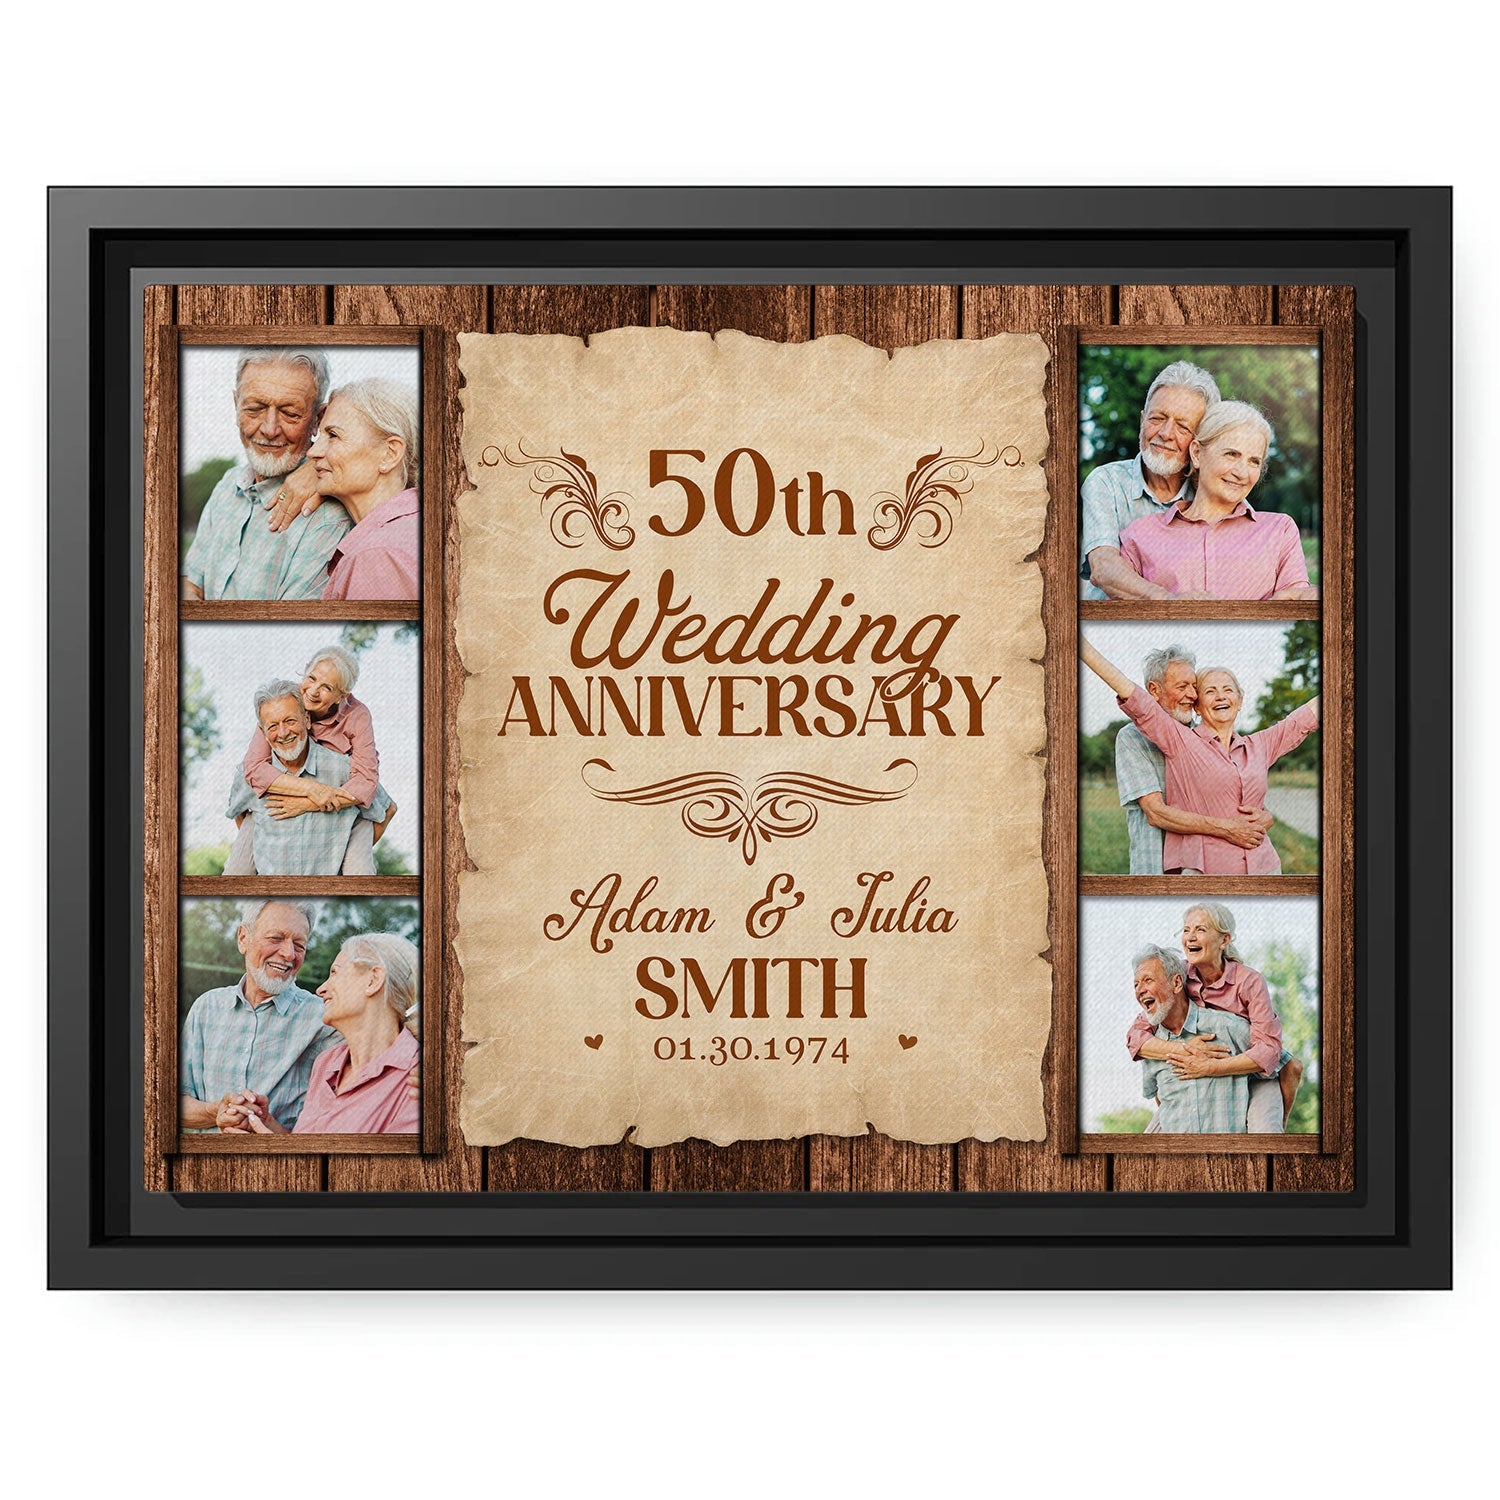 Personalized 50th Wedding Anniversary gift For Parents, Friends, Husband or Wife - Custom Canvas Print - MyMindfulGifts